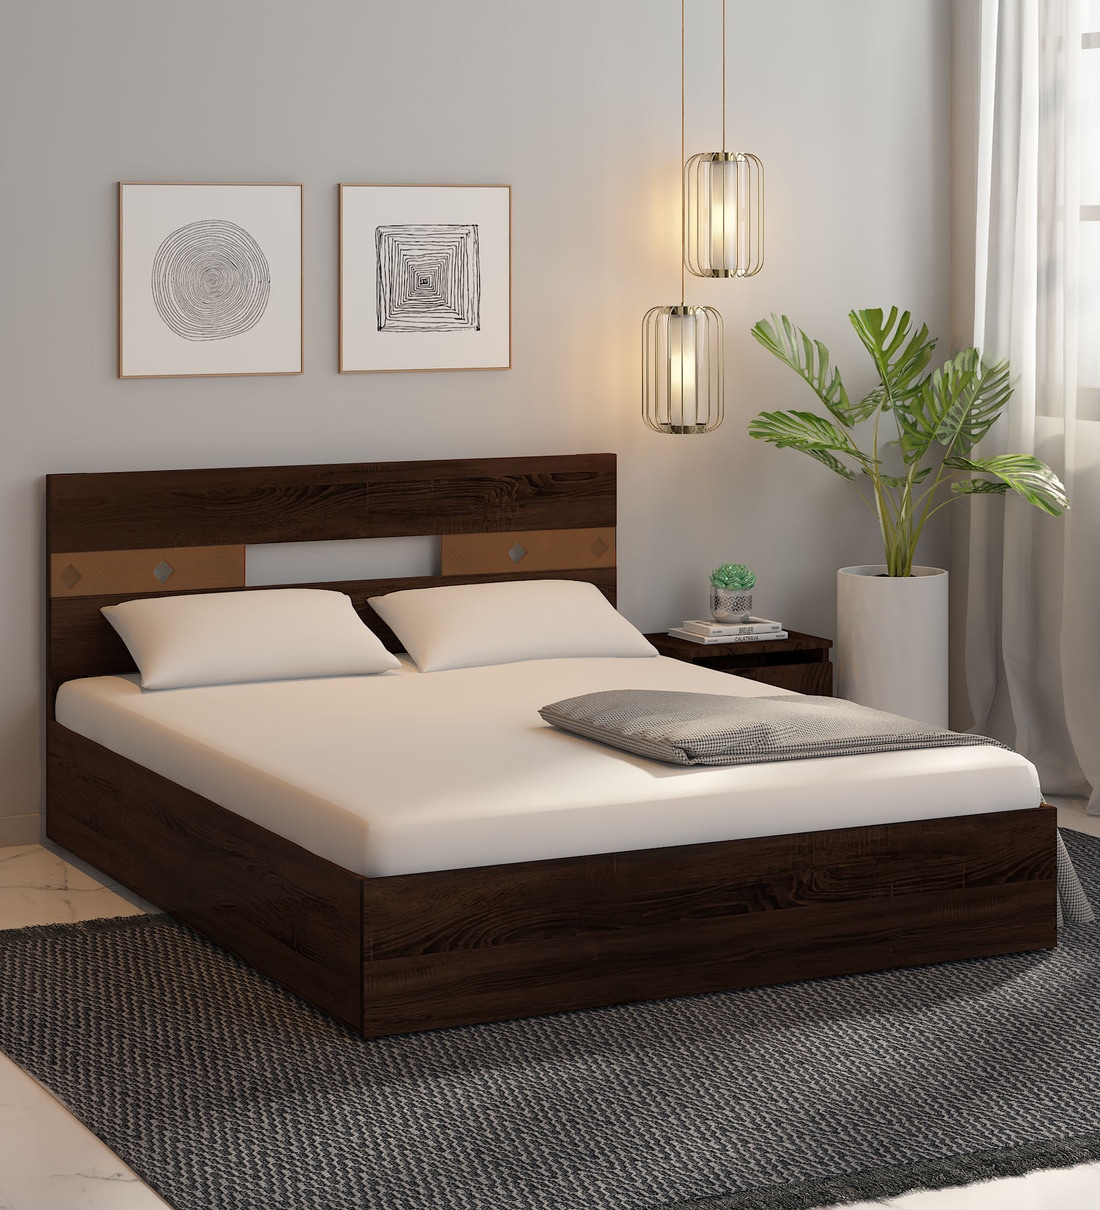 Yuudai Queen Size Bed in Walnut Finish, 